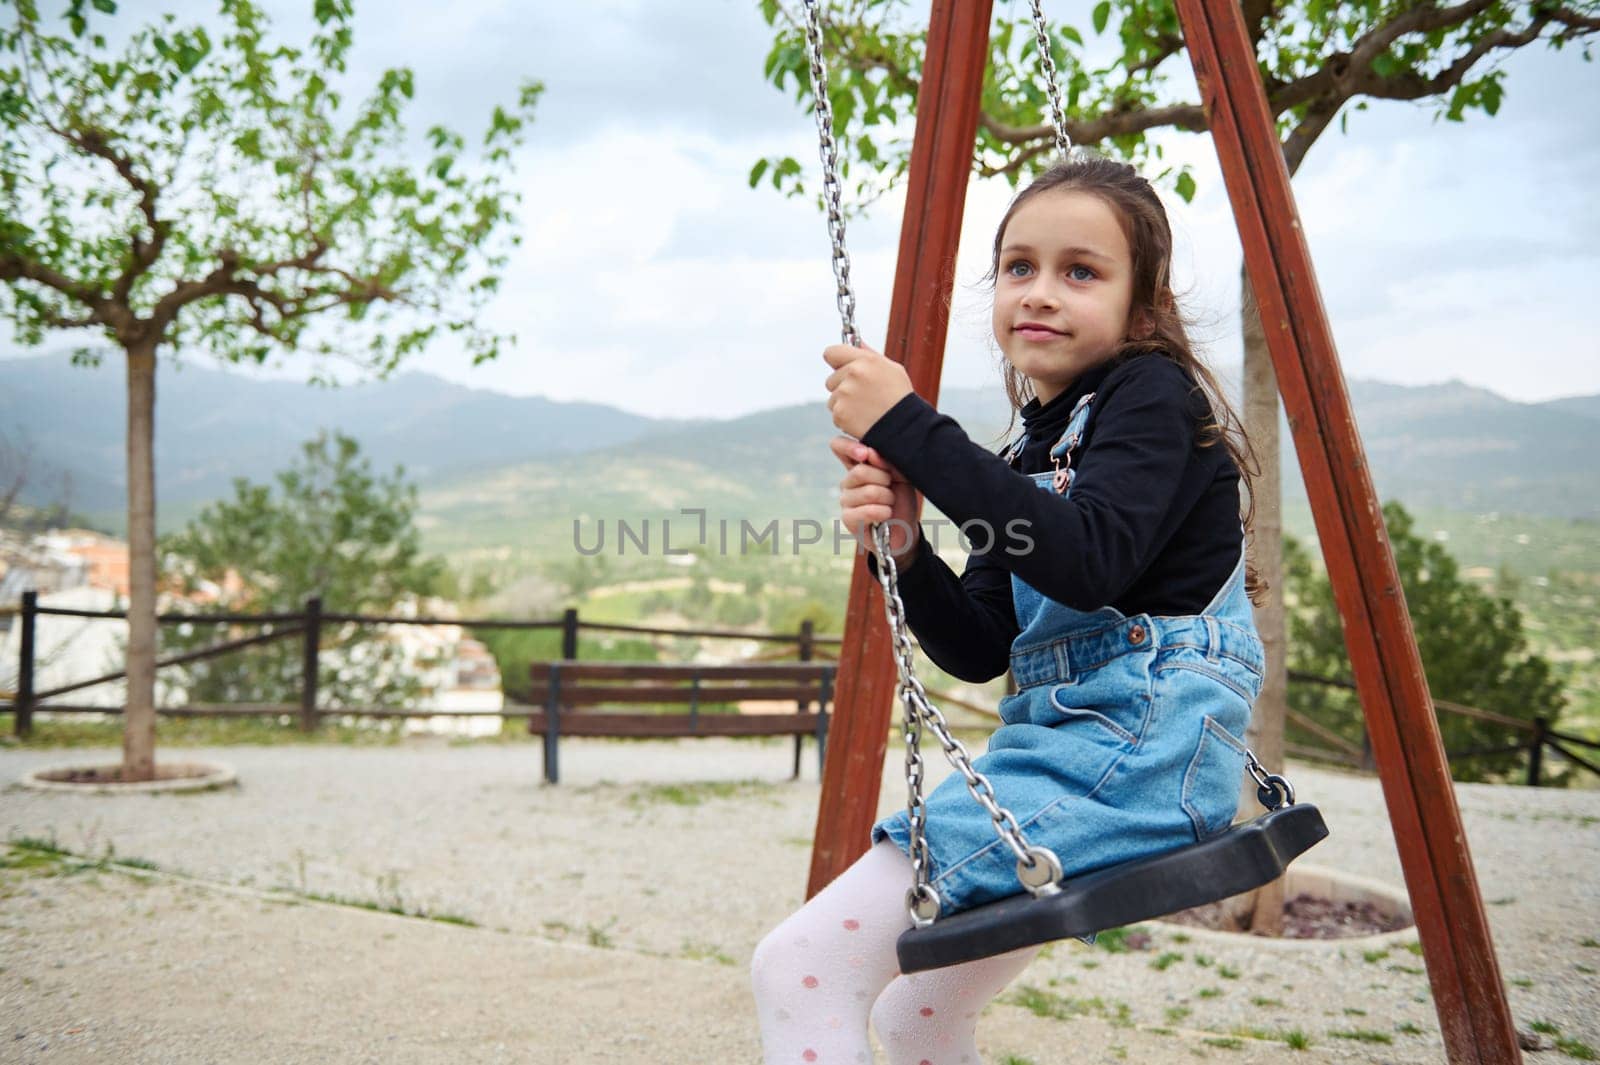 Little child girl 6 years old smiles at camera while sitting on a wooden swing in the playground outdoors. People. Happy carefree childhood. Recreation